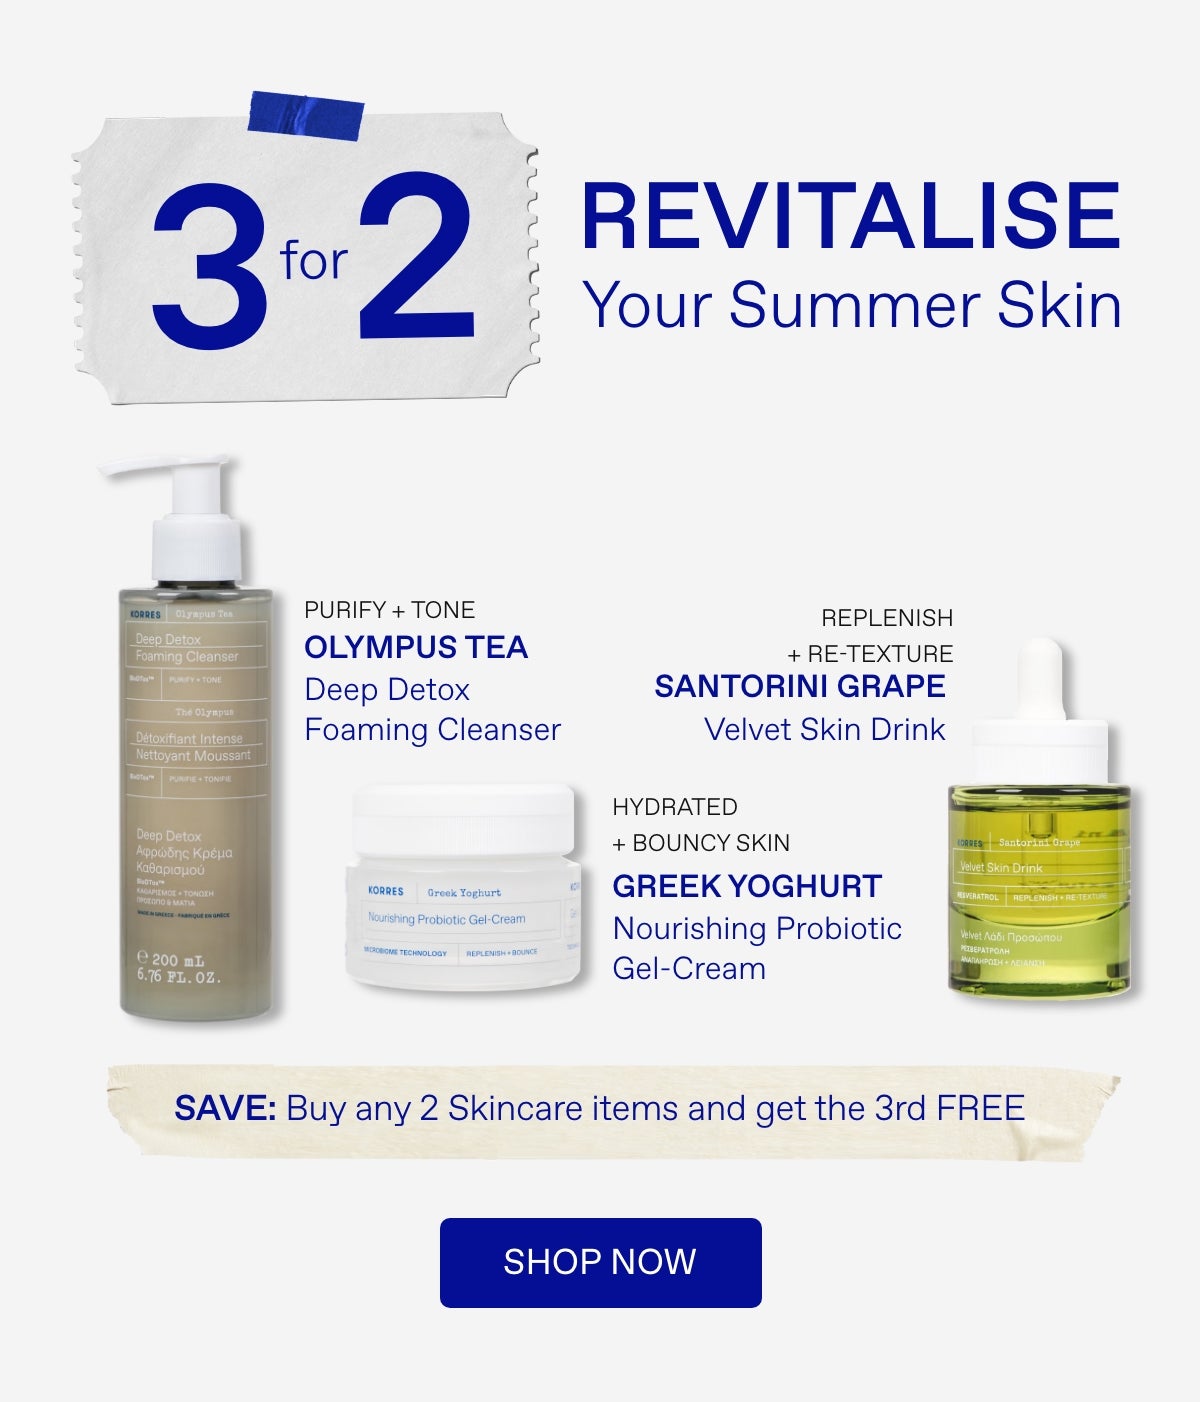 Buy any 2 Skincare items and get the 3rd FREE